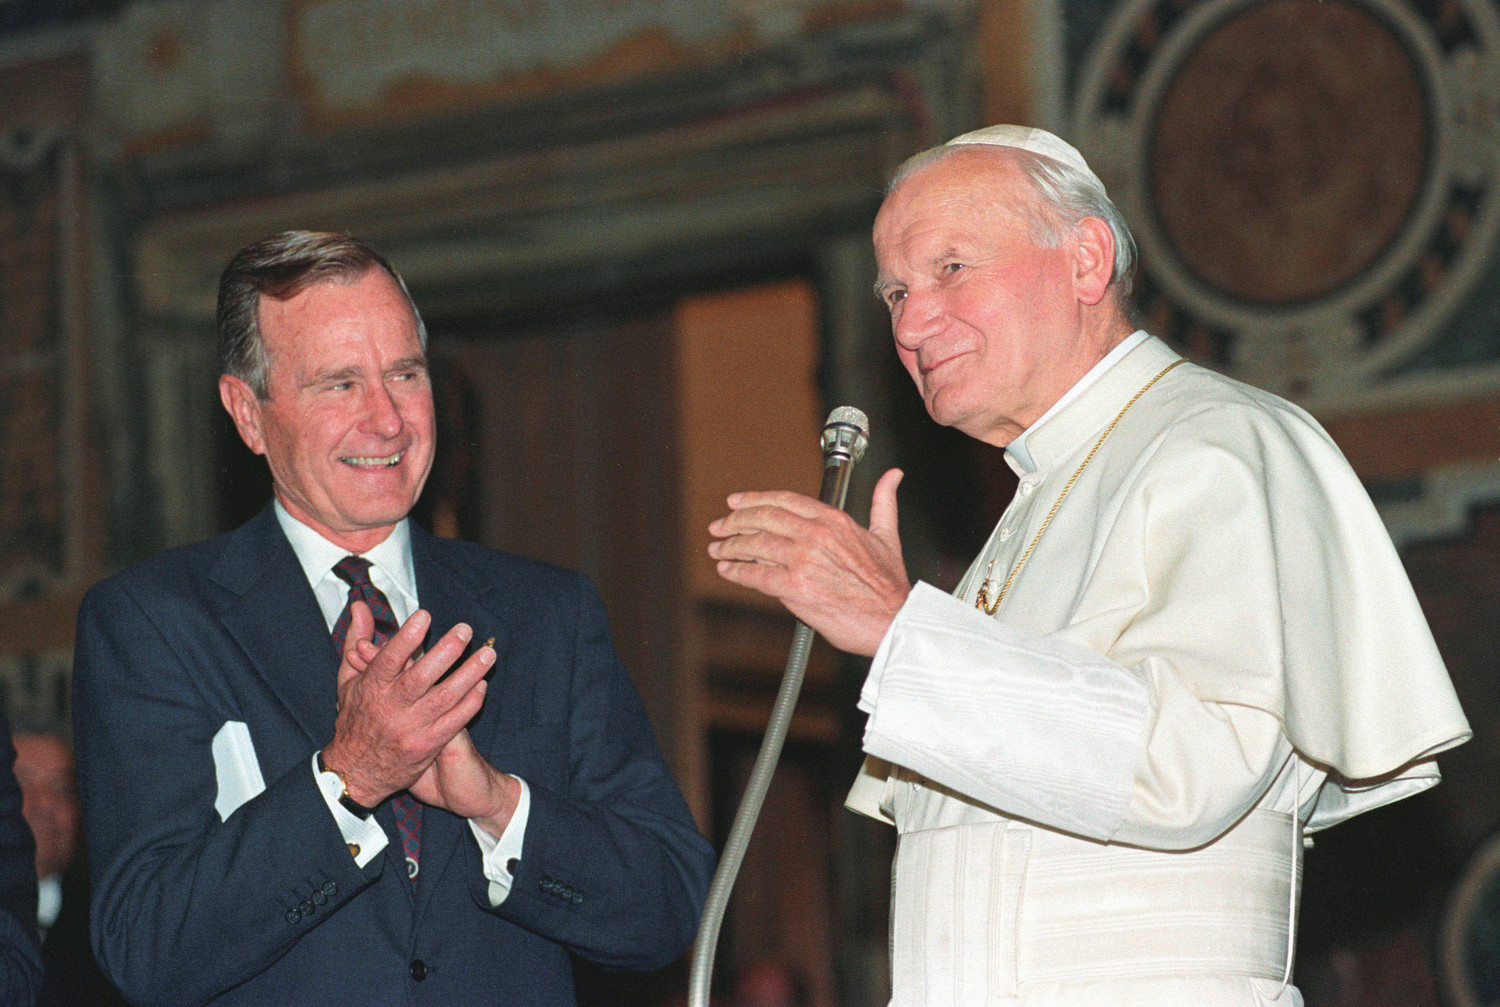 U.S. President George H.W. Bush applauds St. John Paul II after a welcoming ceremony prior to their audience at the Vatican in 1991. Bush, the 41st president of the United States and the father of the 43rd, died Nov. 30 at his home in Houston. He was 94.